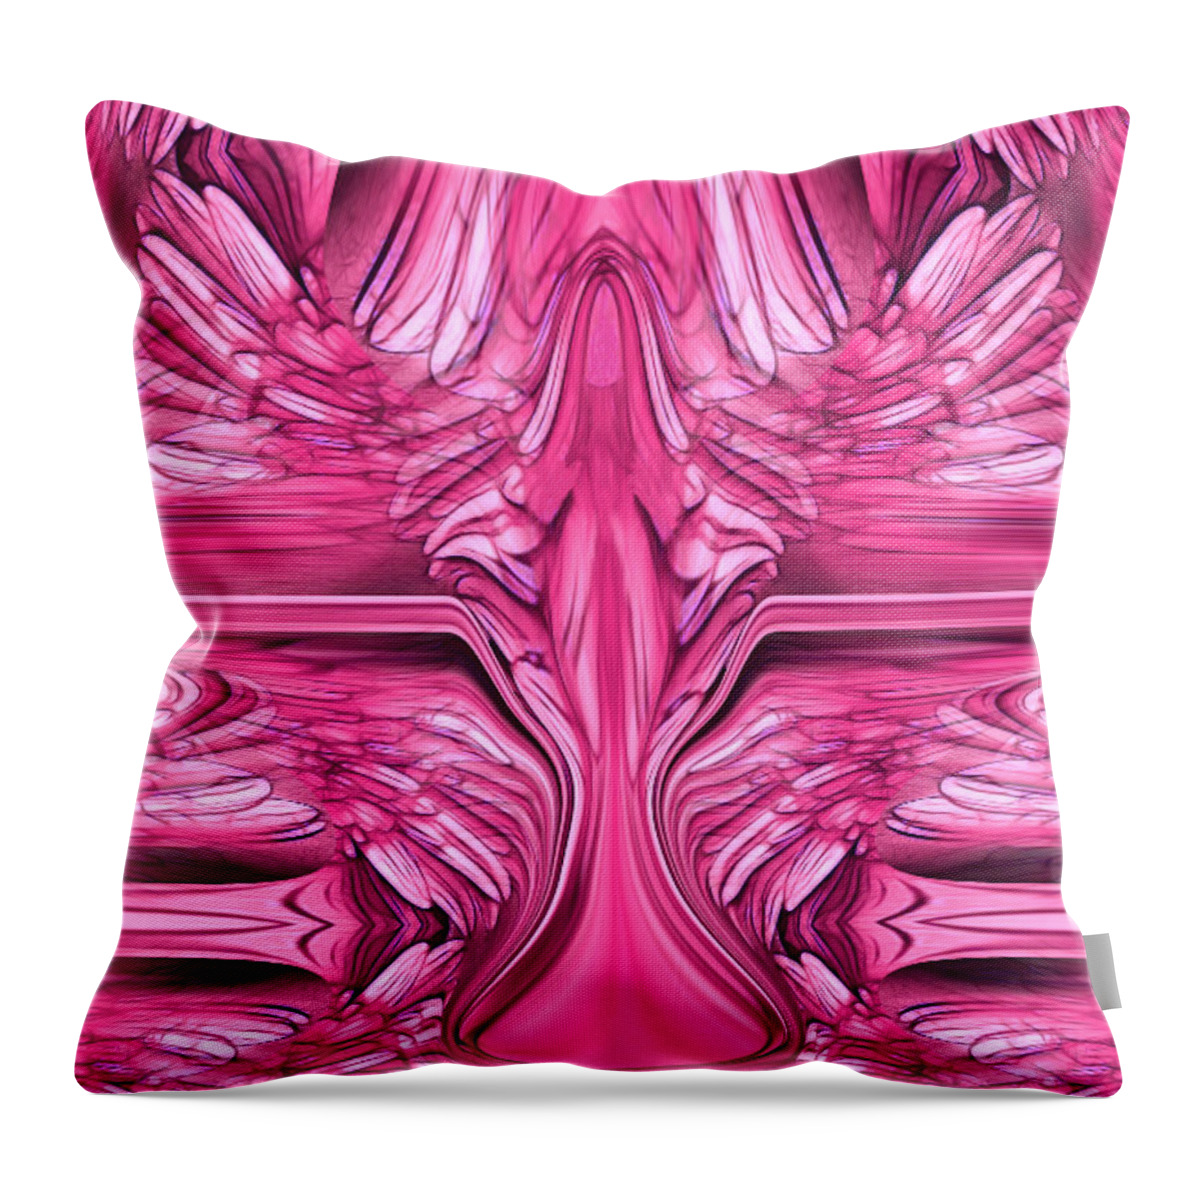 Spirit Guide Throw Pillow featuring the digital art SPIRIT GUIDE - Pink Hues by Artistic Mystic